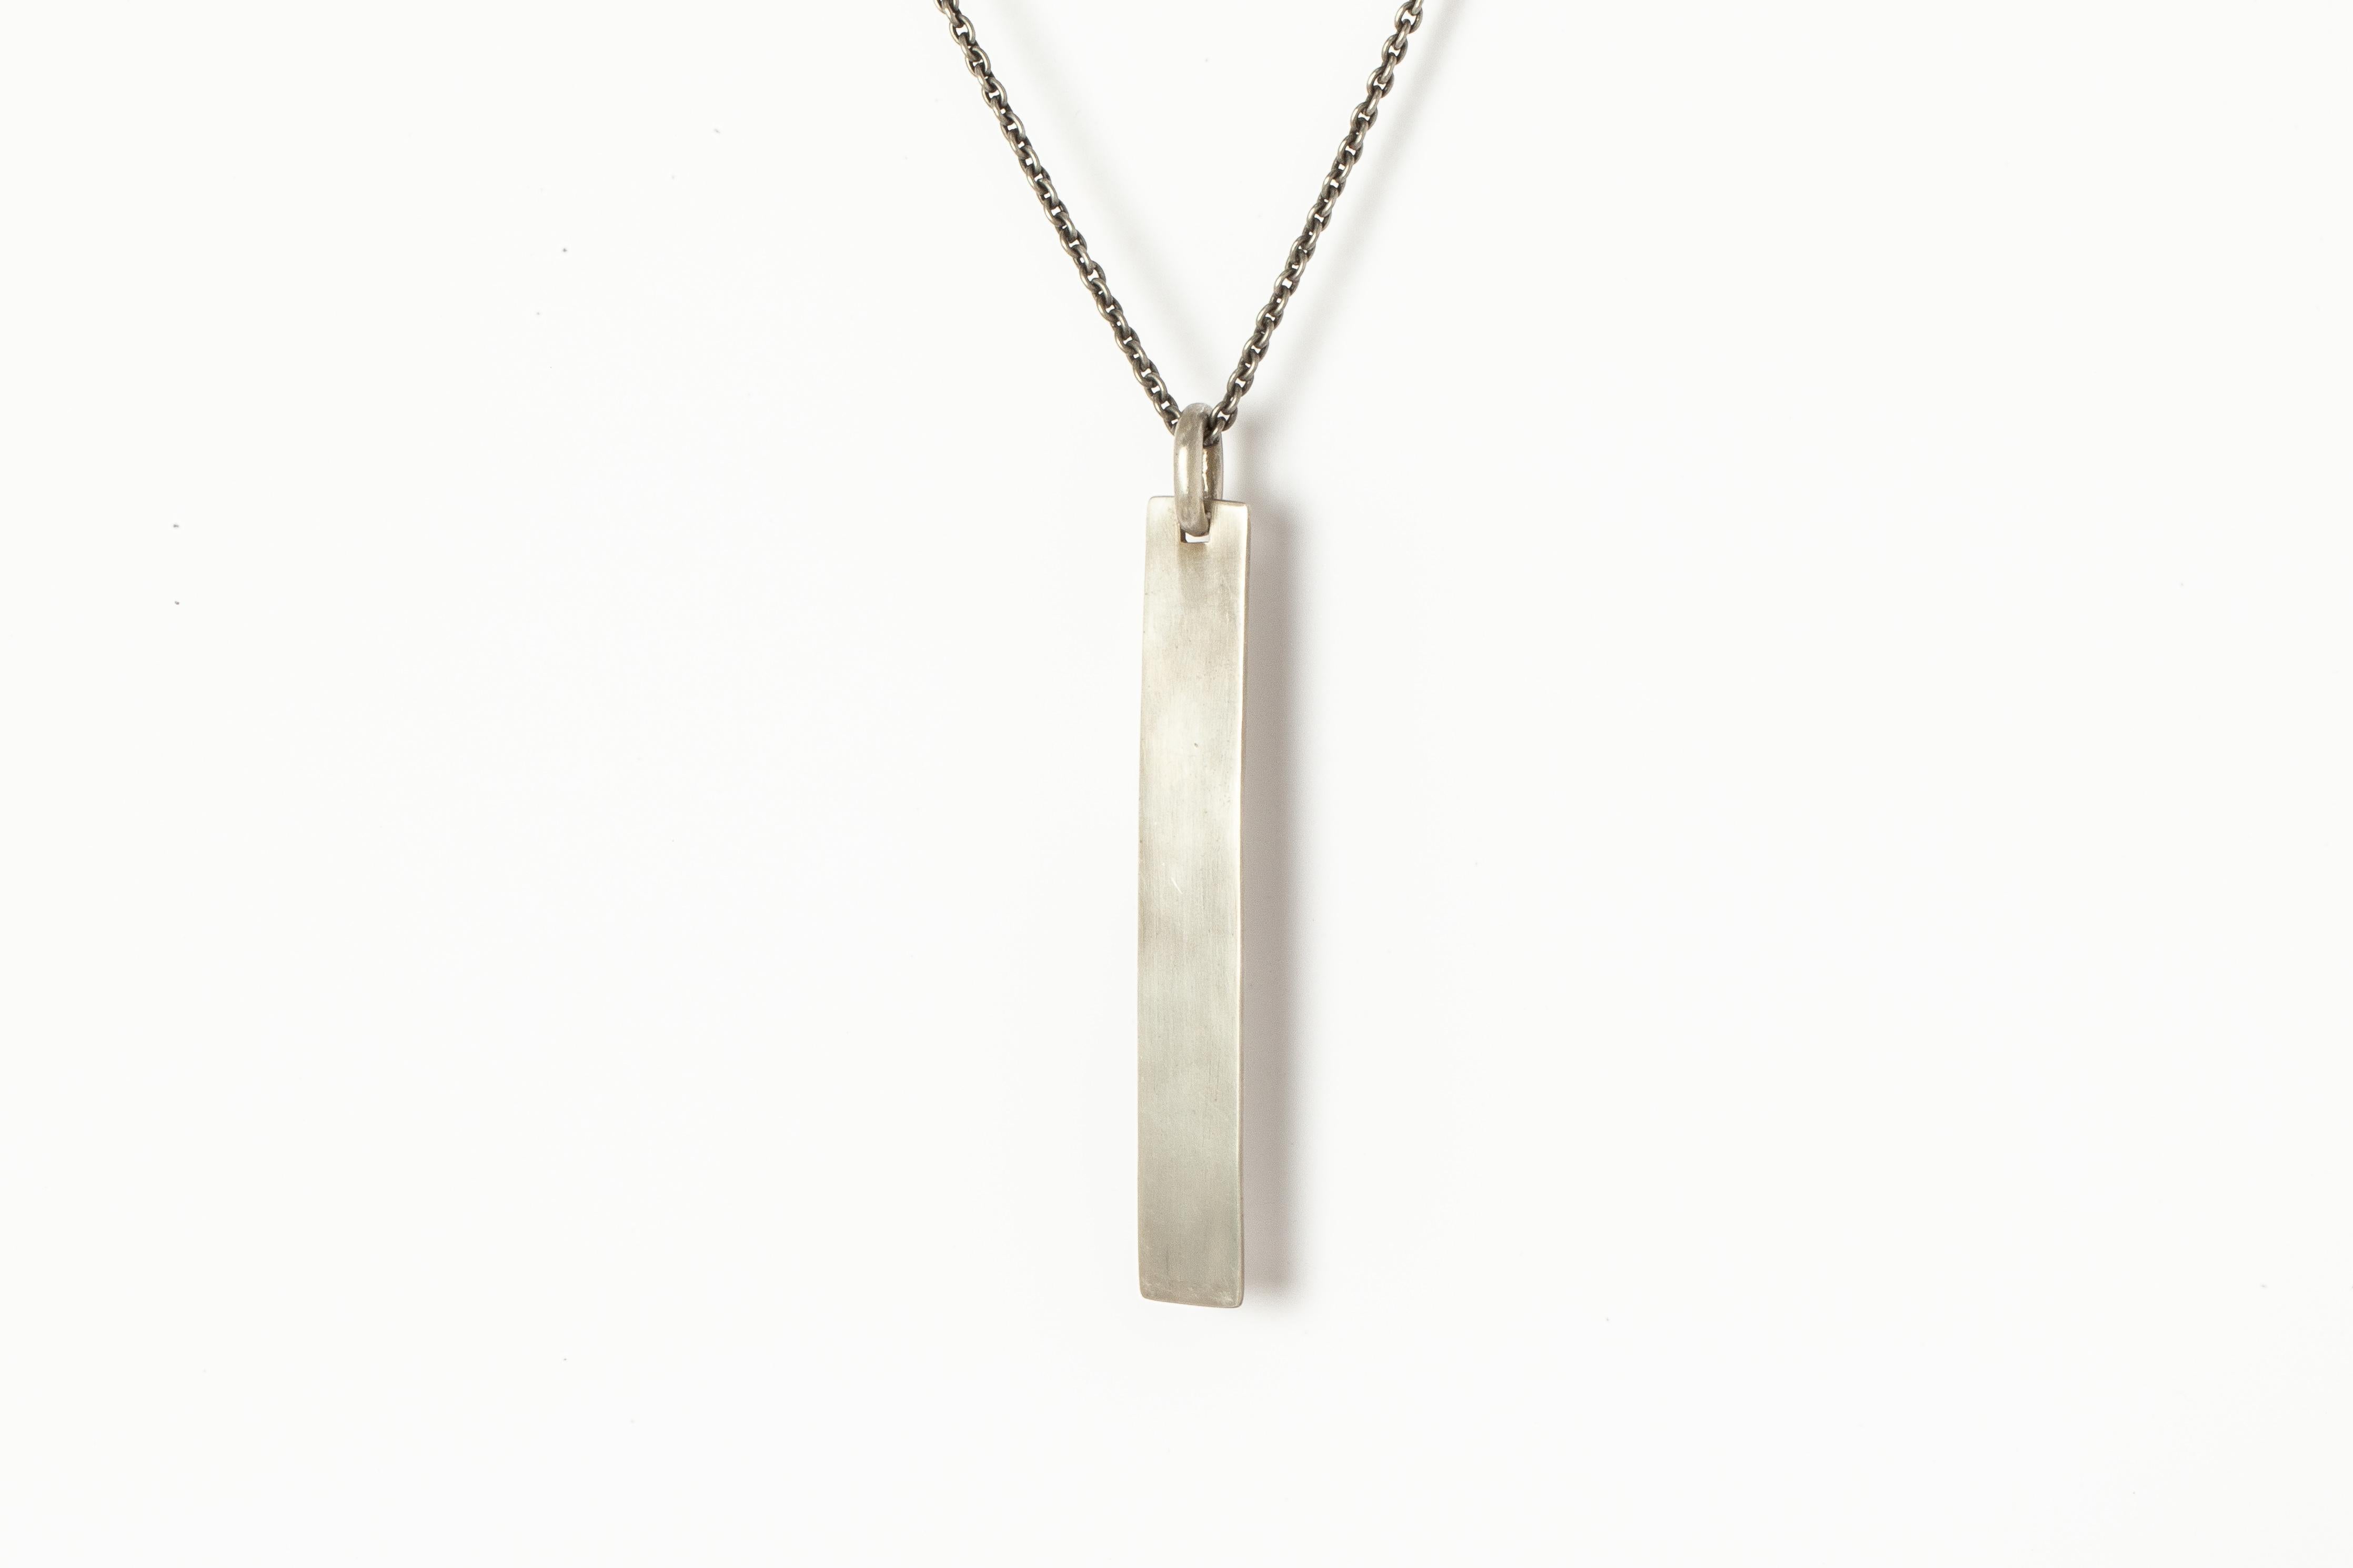 Plate necklace in brass, it comes on a 74cm chain. Brass substrate is electroplated with silver and then dipped into acid to create the subtly destroyed surface.